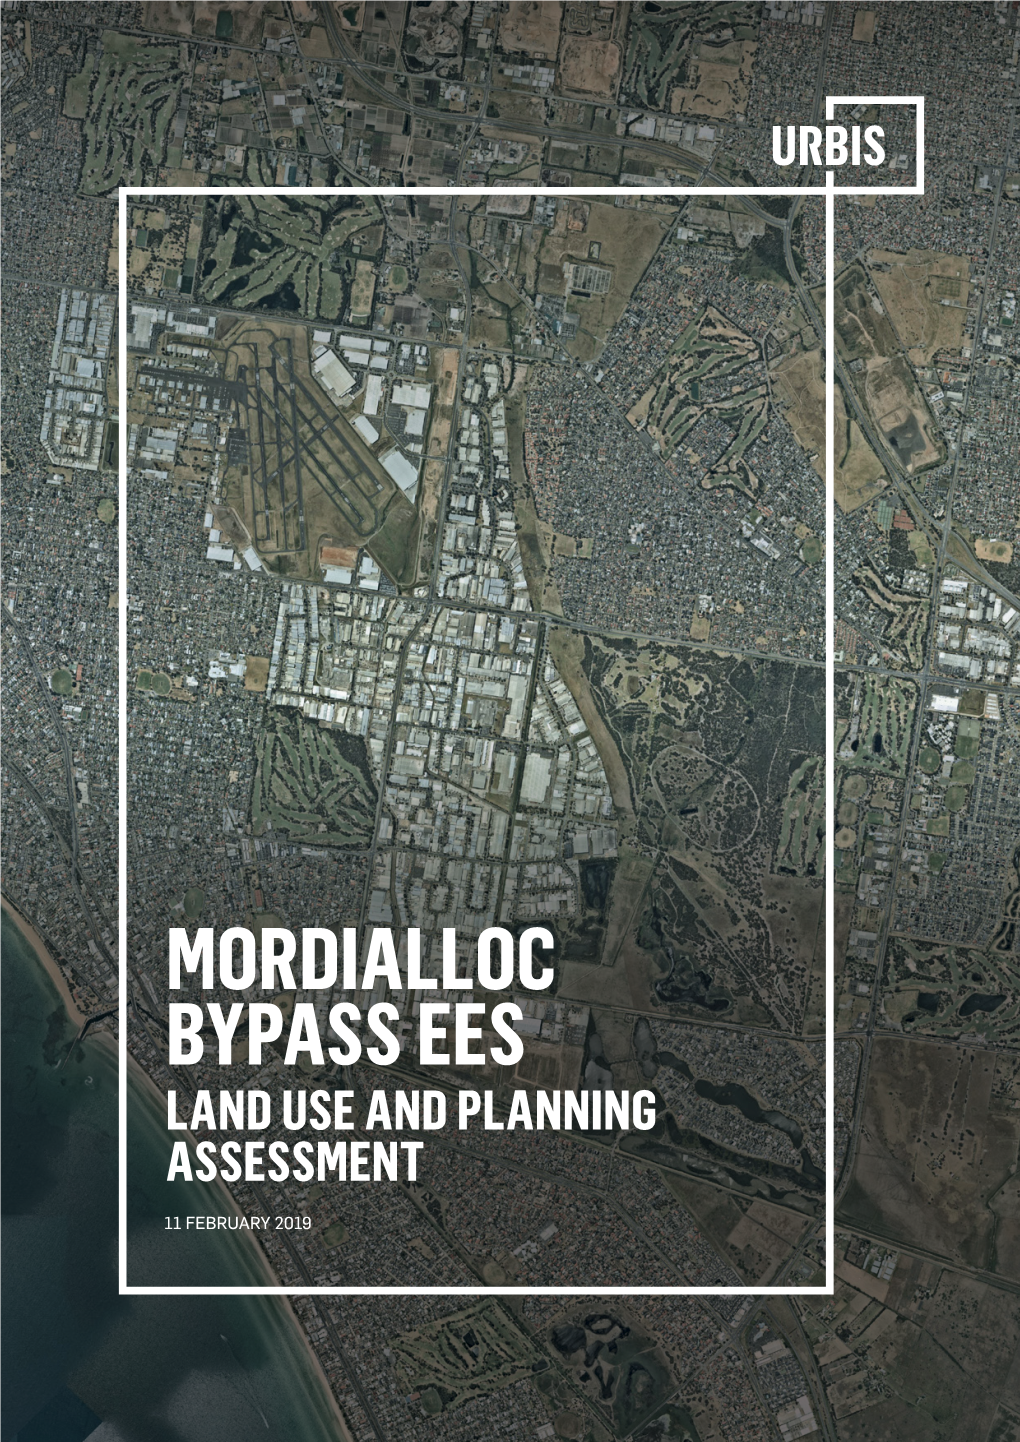 Mordialloc Bypass Ees Land Use and Planning Assessment